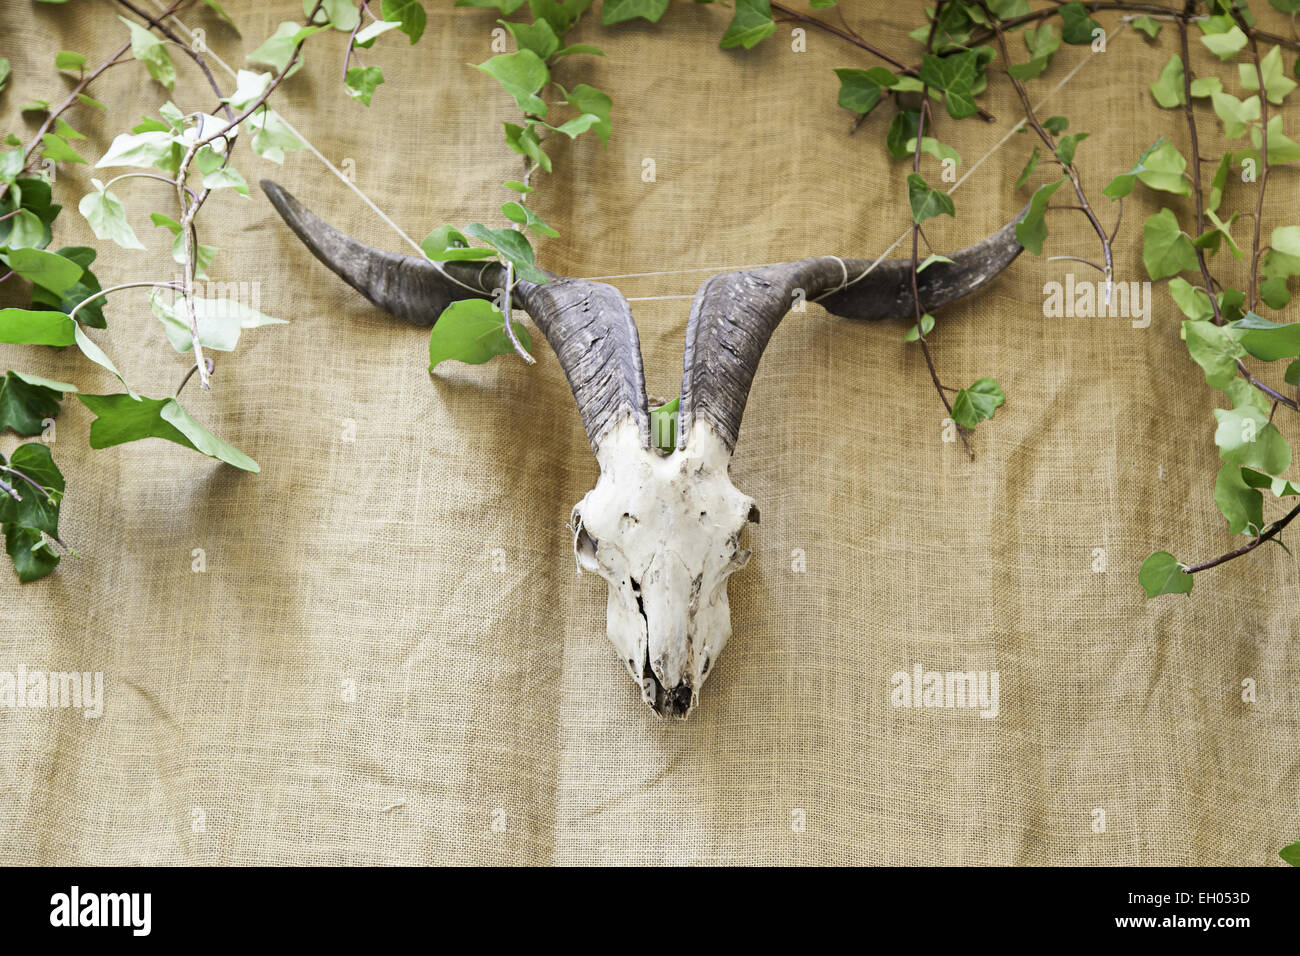 Indian Skull animal, detail of an ancient Indian tradition Stock Photo